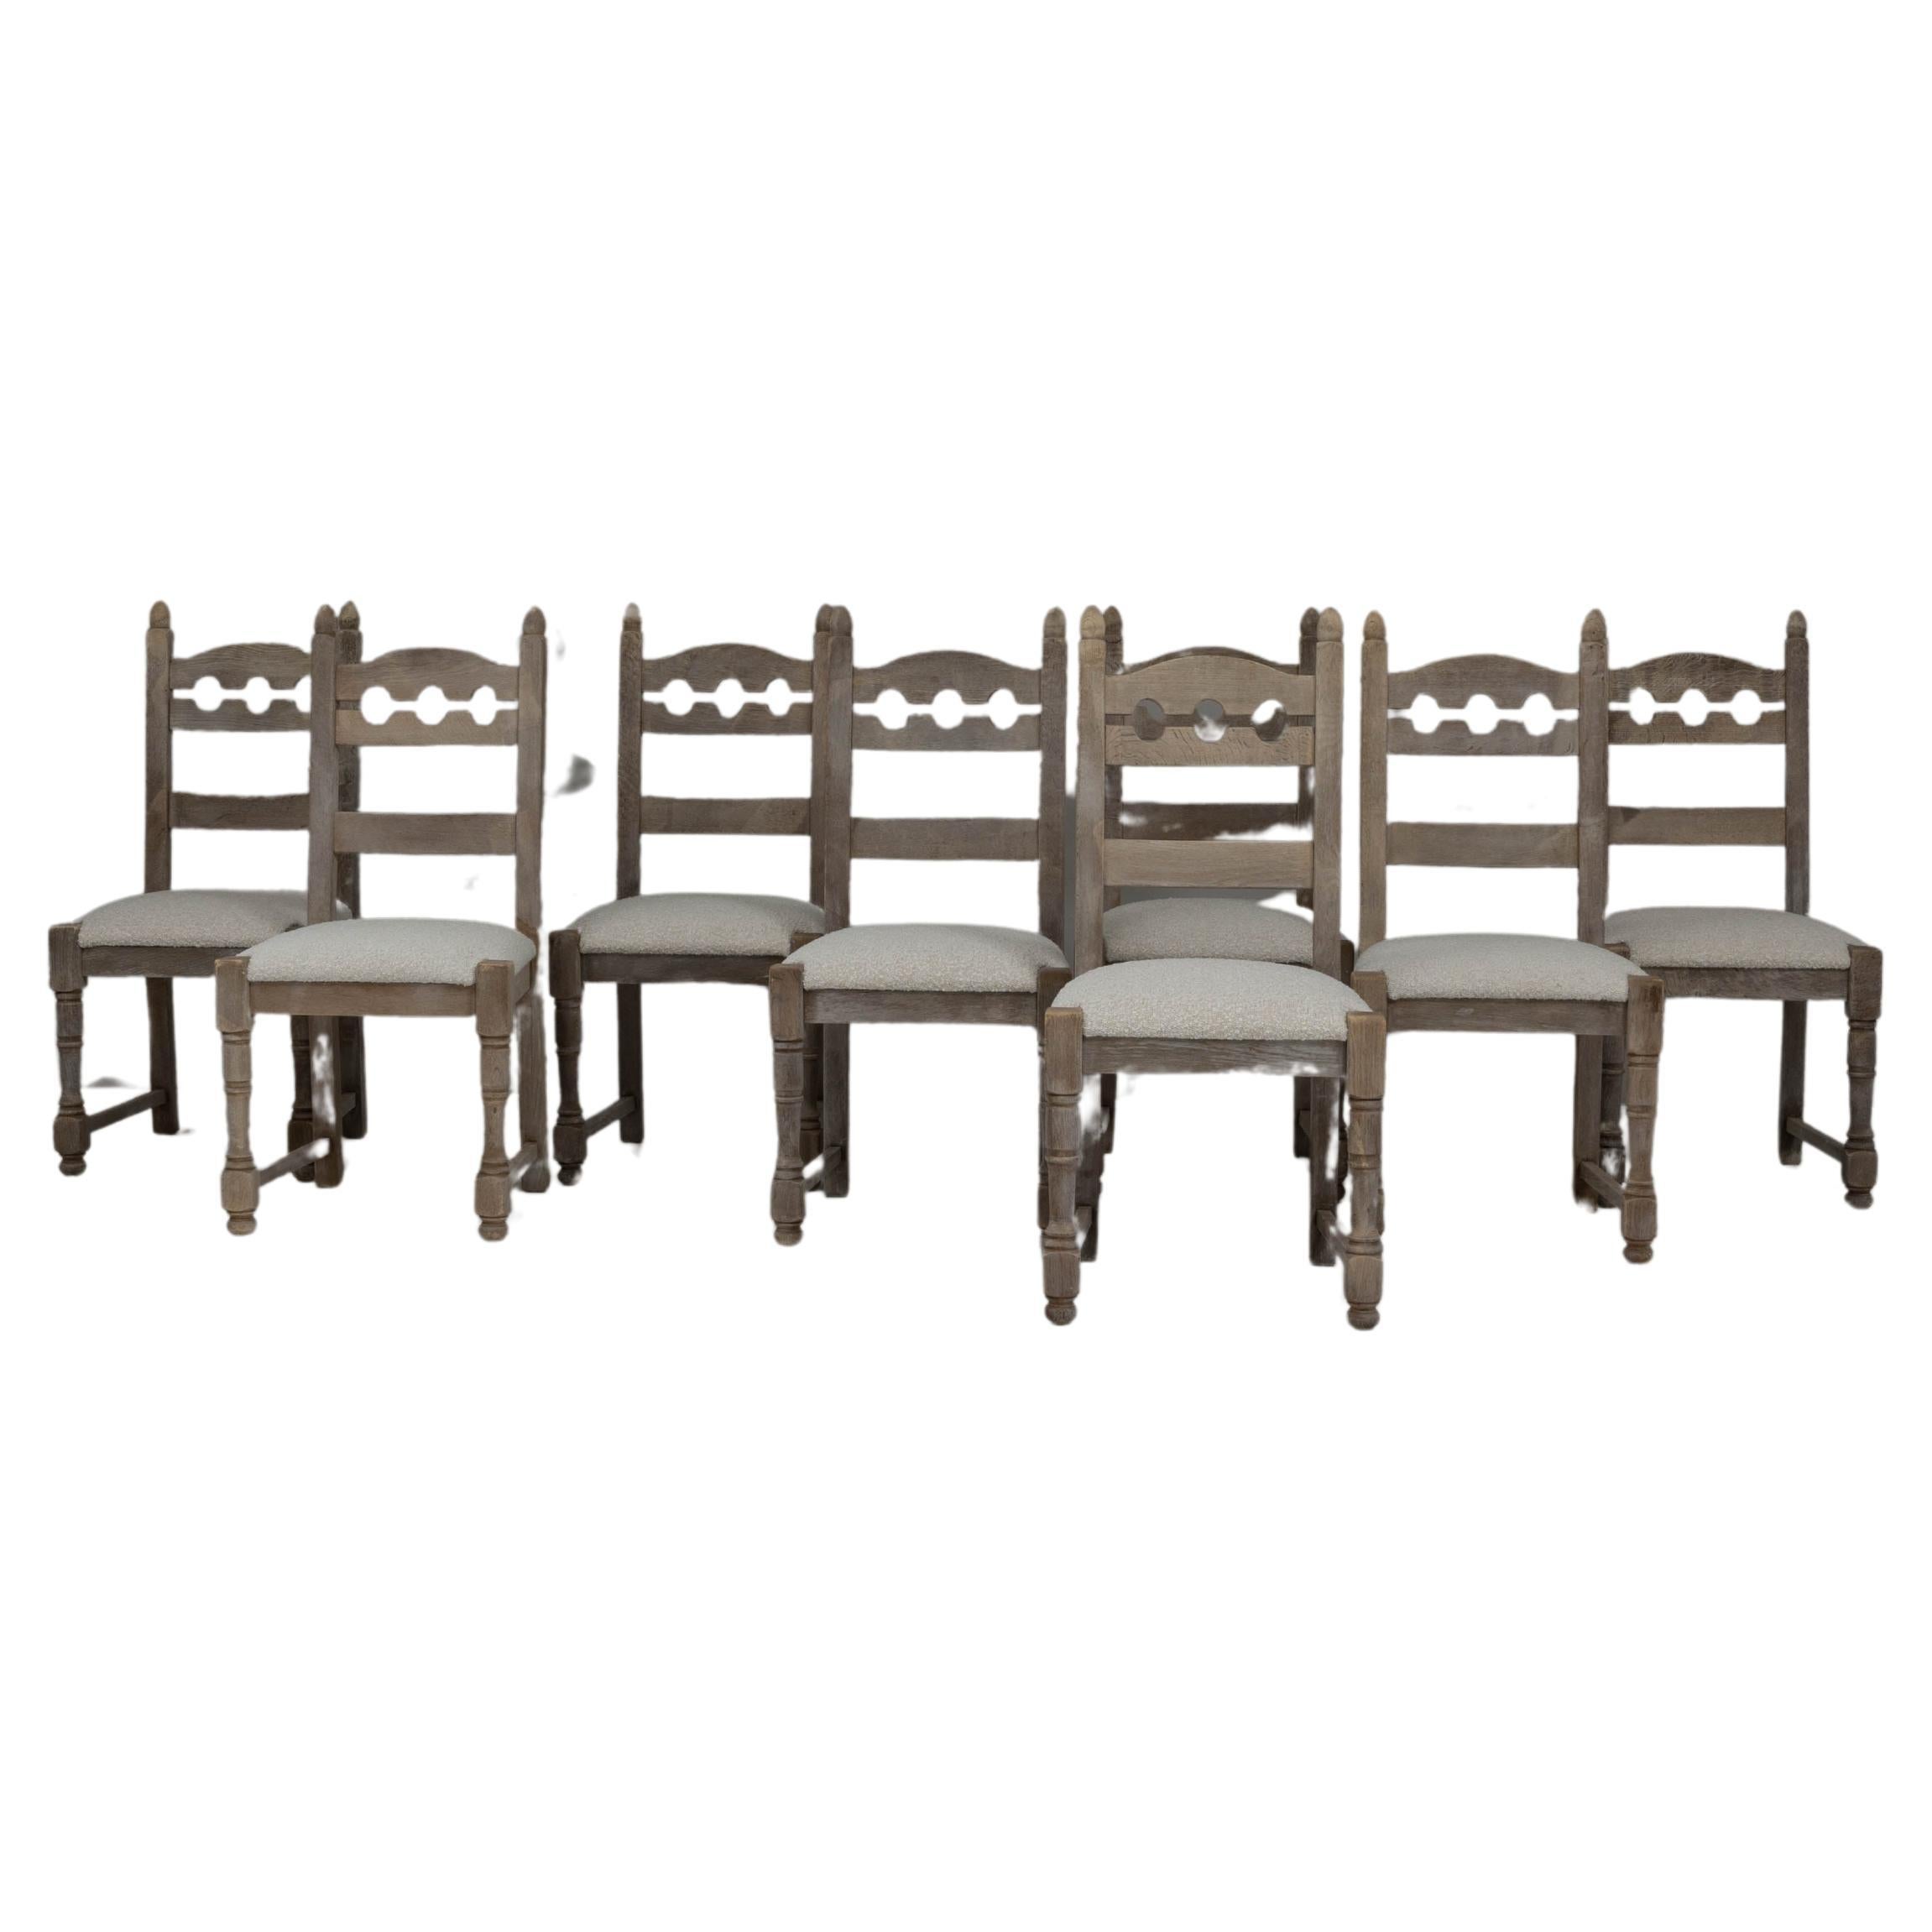 20th Century French Bleached Oak Dining Chairs With Upholstered Seats, Set of 8